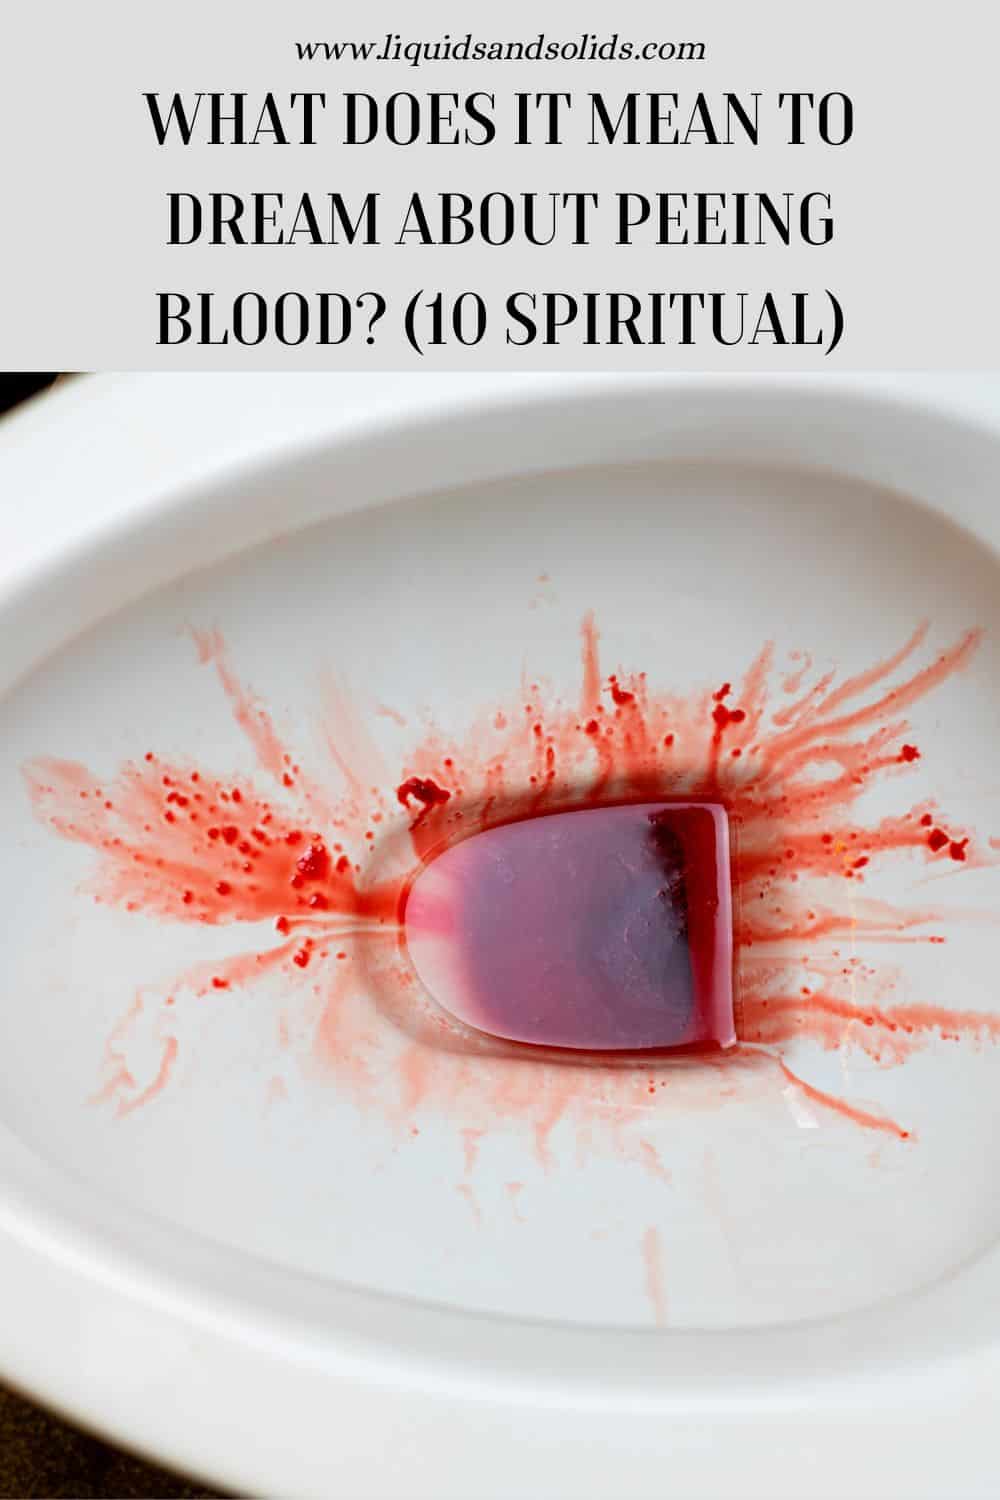 What Does It Mean To Dream About Peeing Blood? (10 Spiritual)